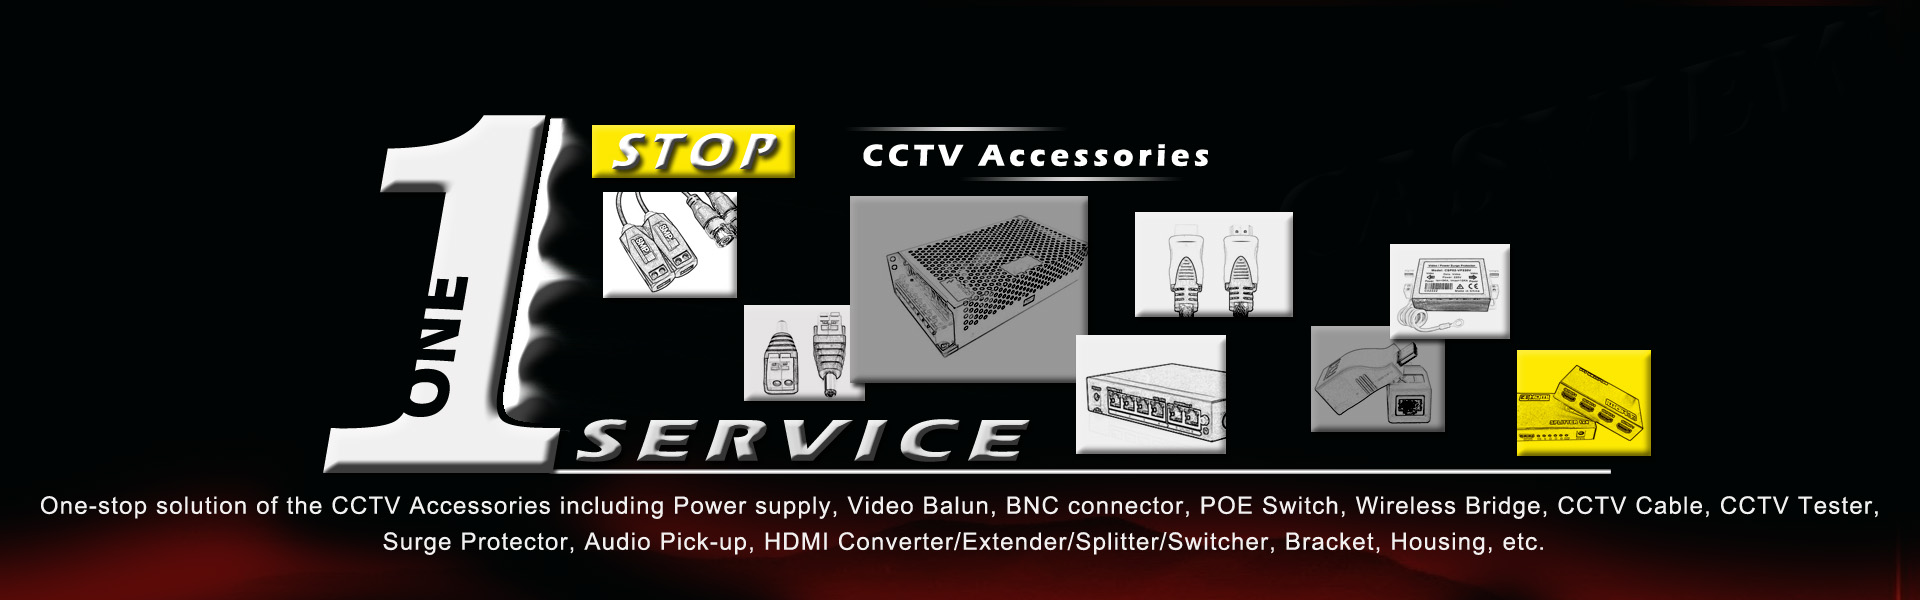 Suppliers of CCTV Accessories